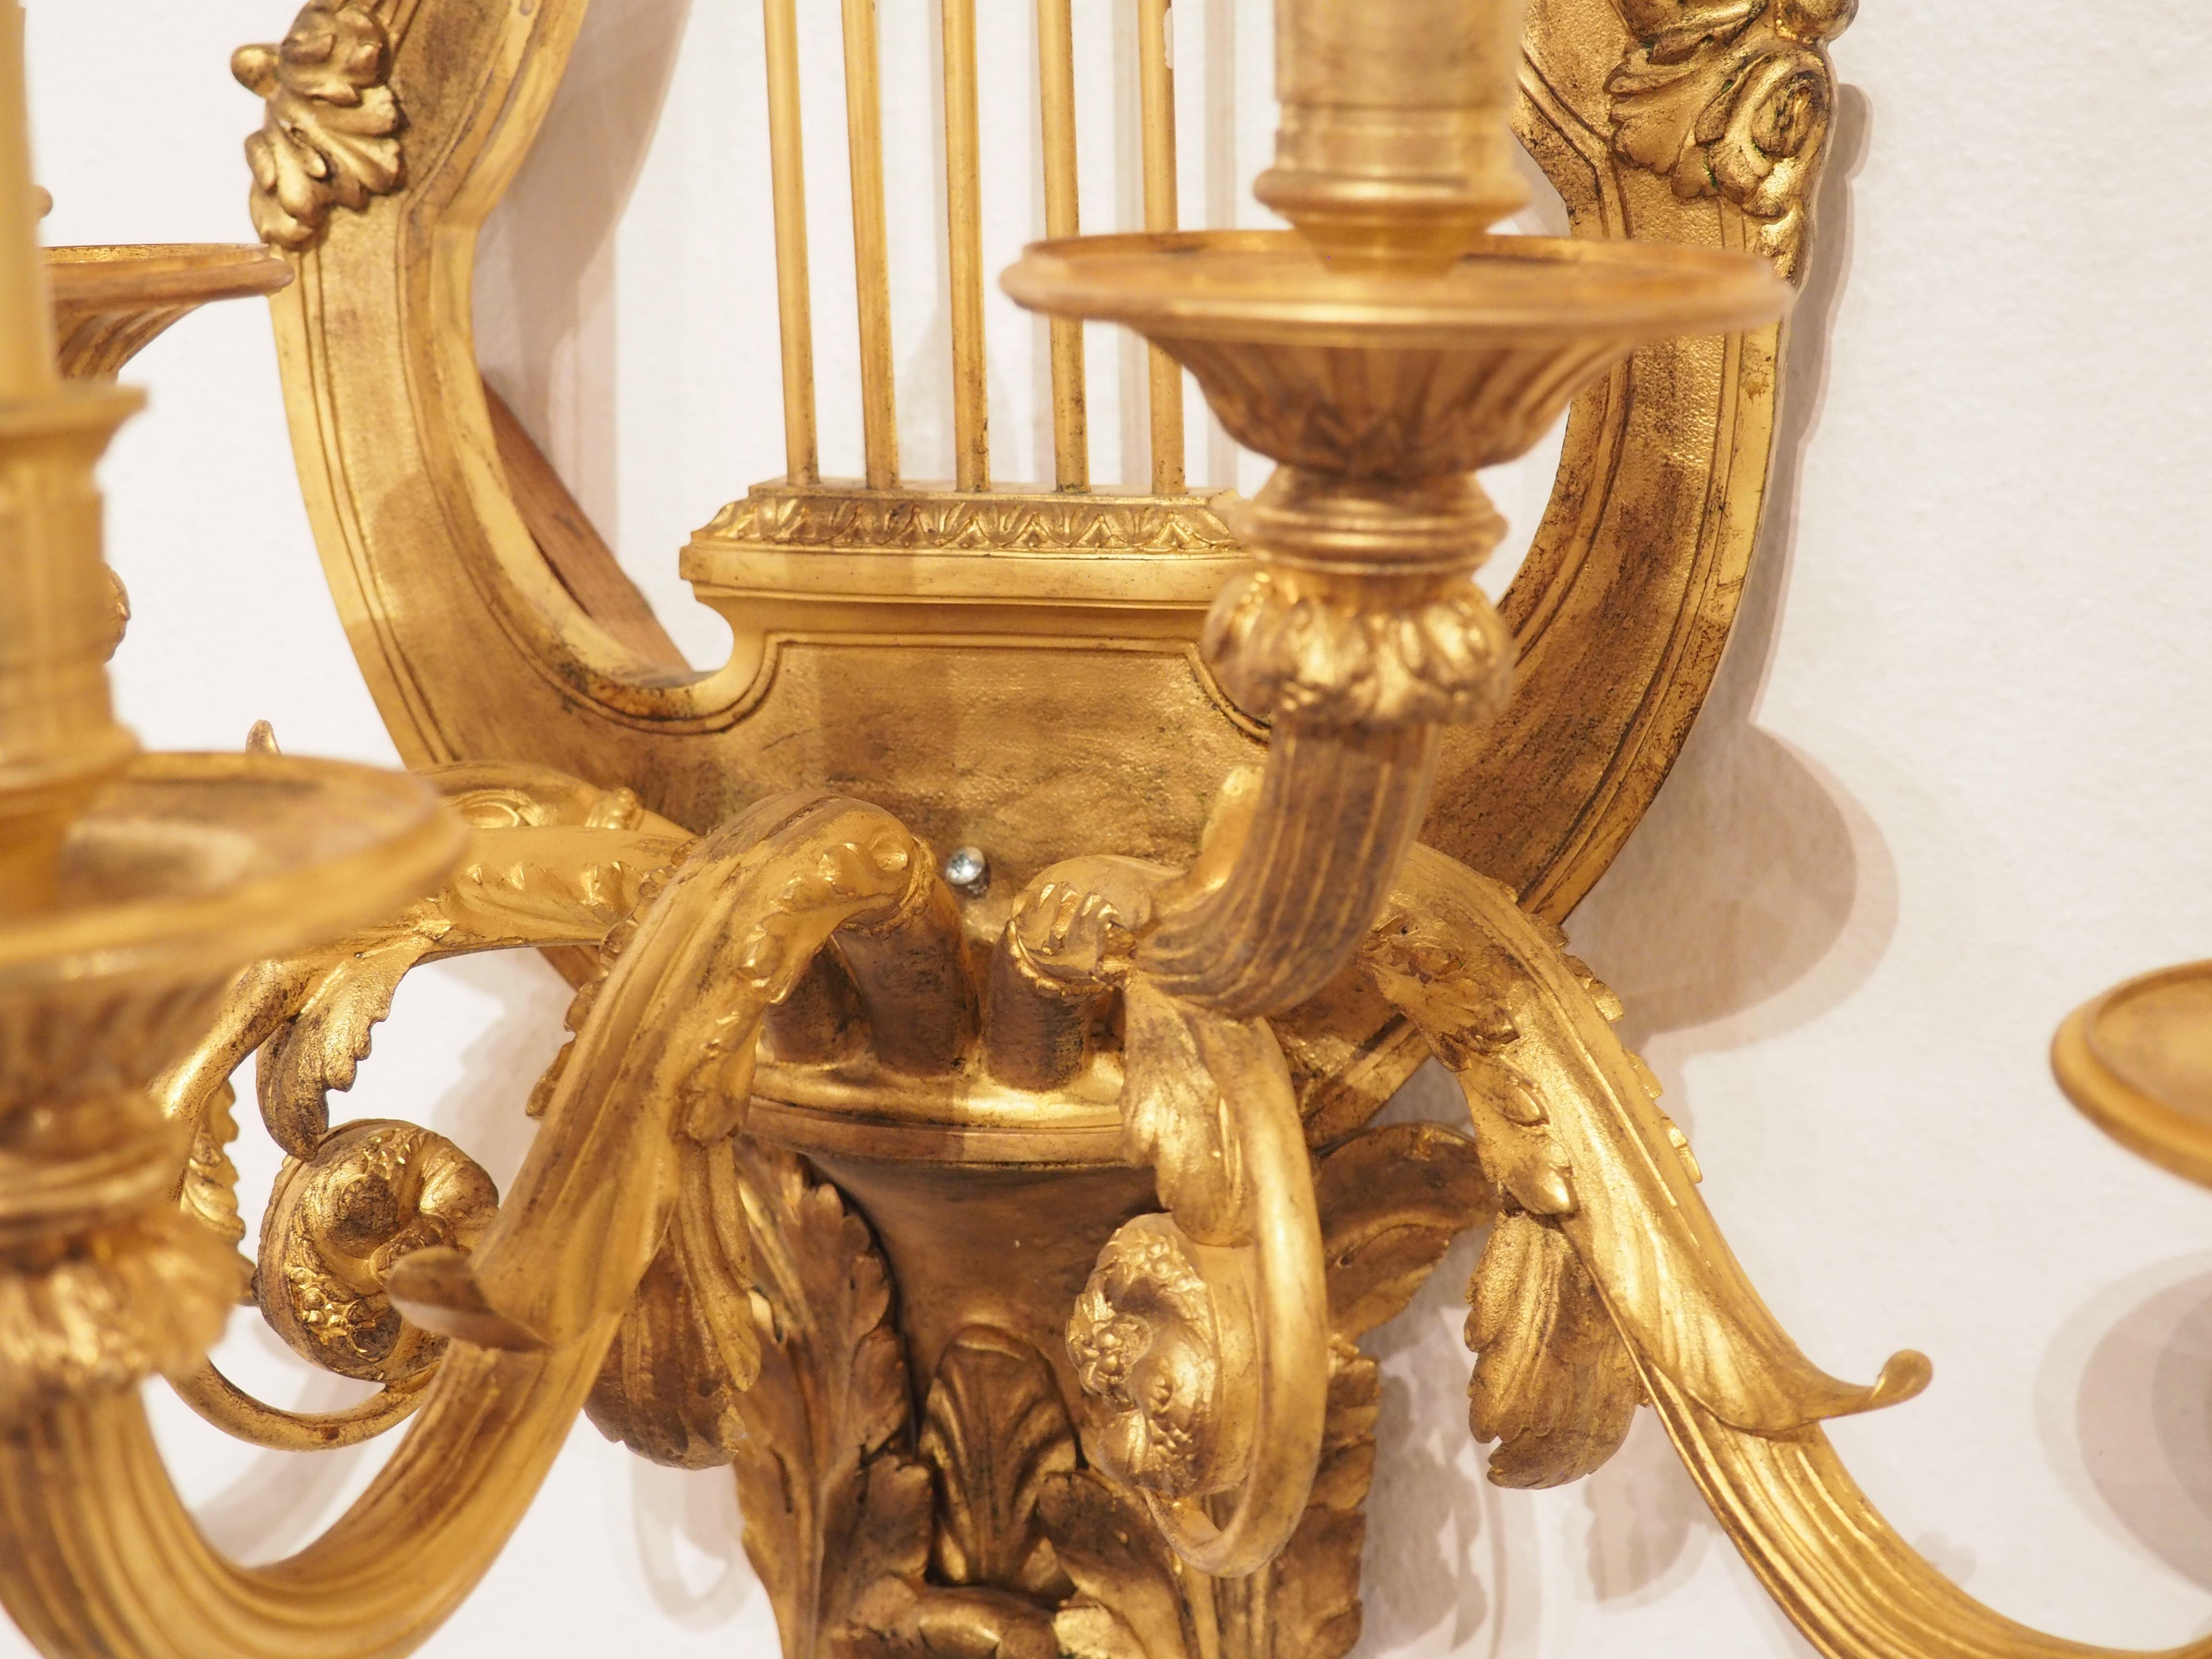 This large pair of wall sconces is made of gilt bronze and dates to the late 19th century.  The design of the sconces is in the Louis XVI taste, as evidenced by the lyre-form body, tied bows, and elegant proportions.  In France, during the reign of